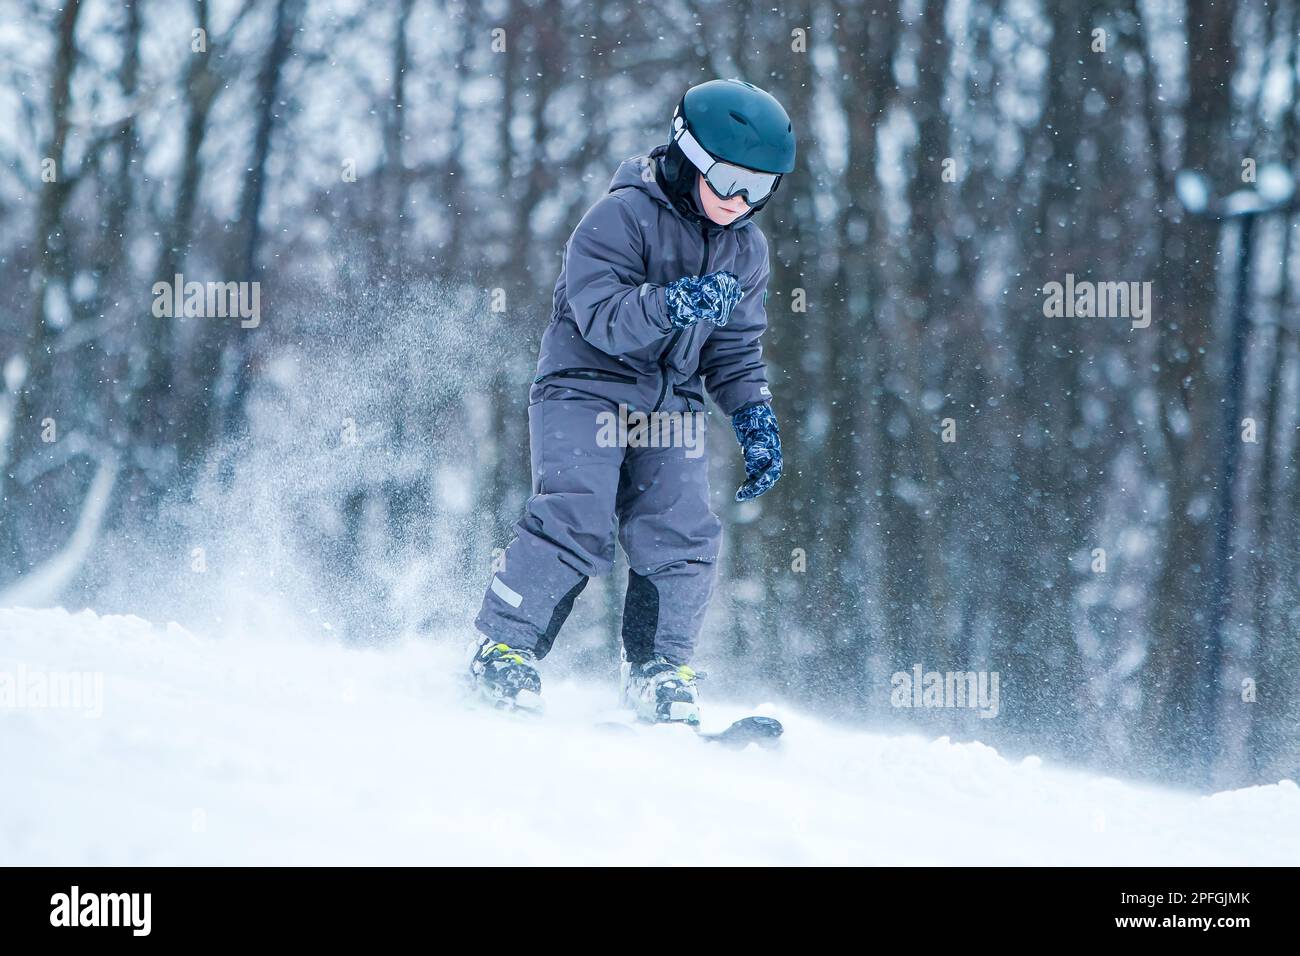 Little skier riding downhill with snow splash. Child skiing in mountains. Active teenage boy with safety helmet, goggles and ski poles running down Stock Photo